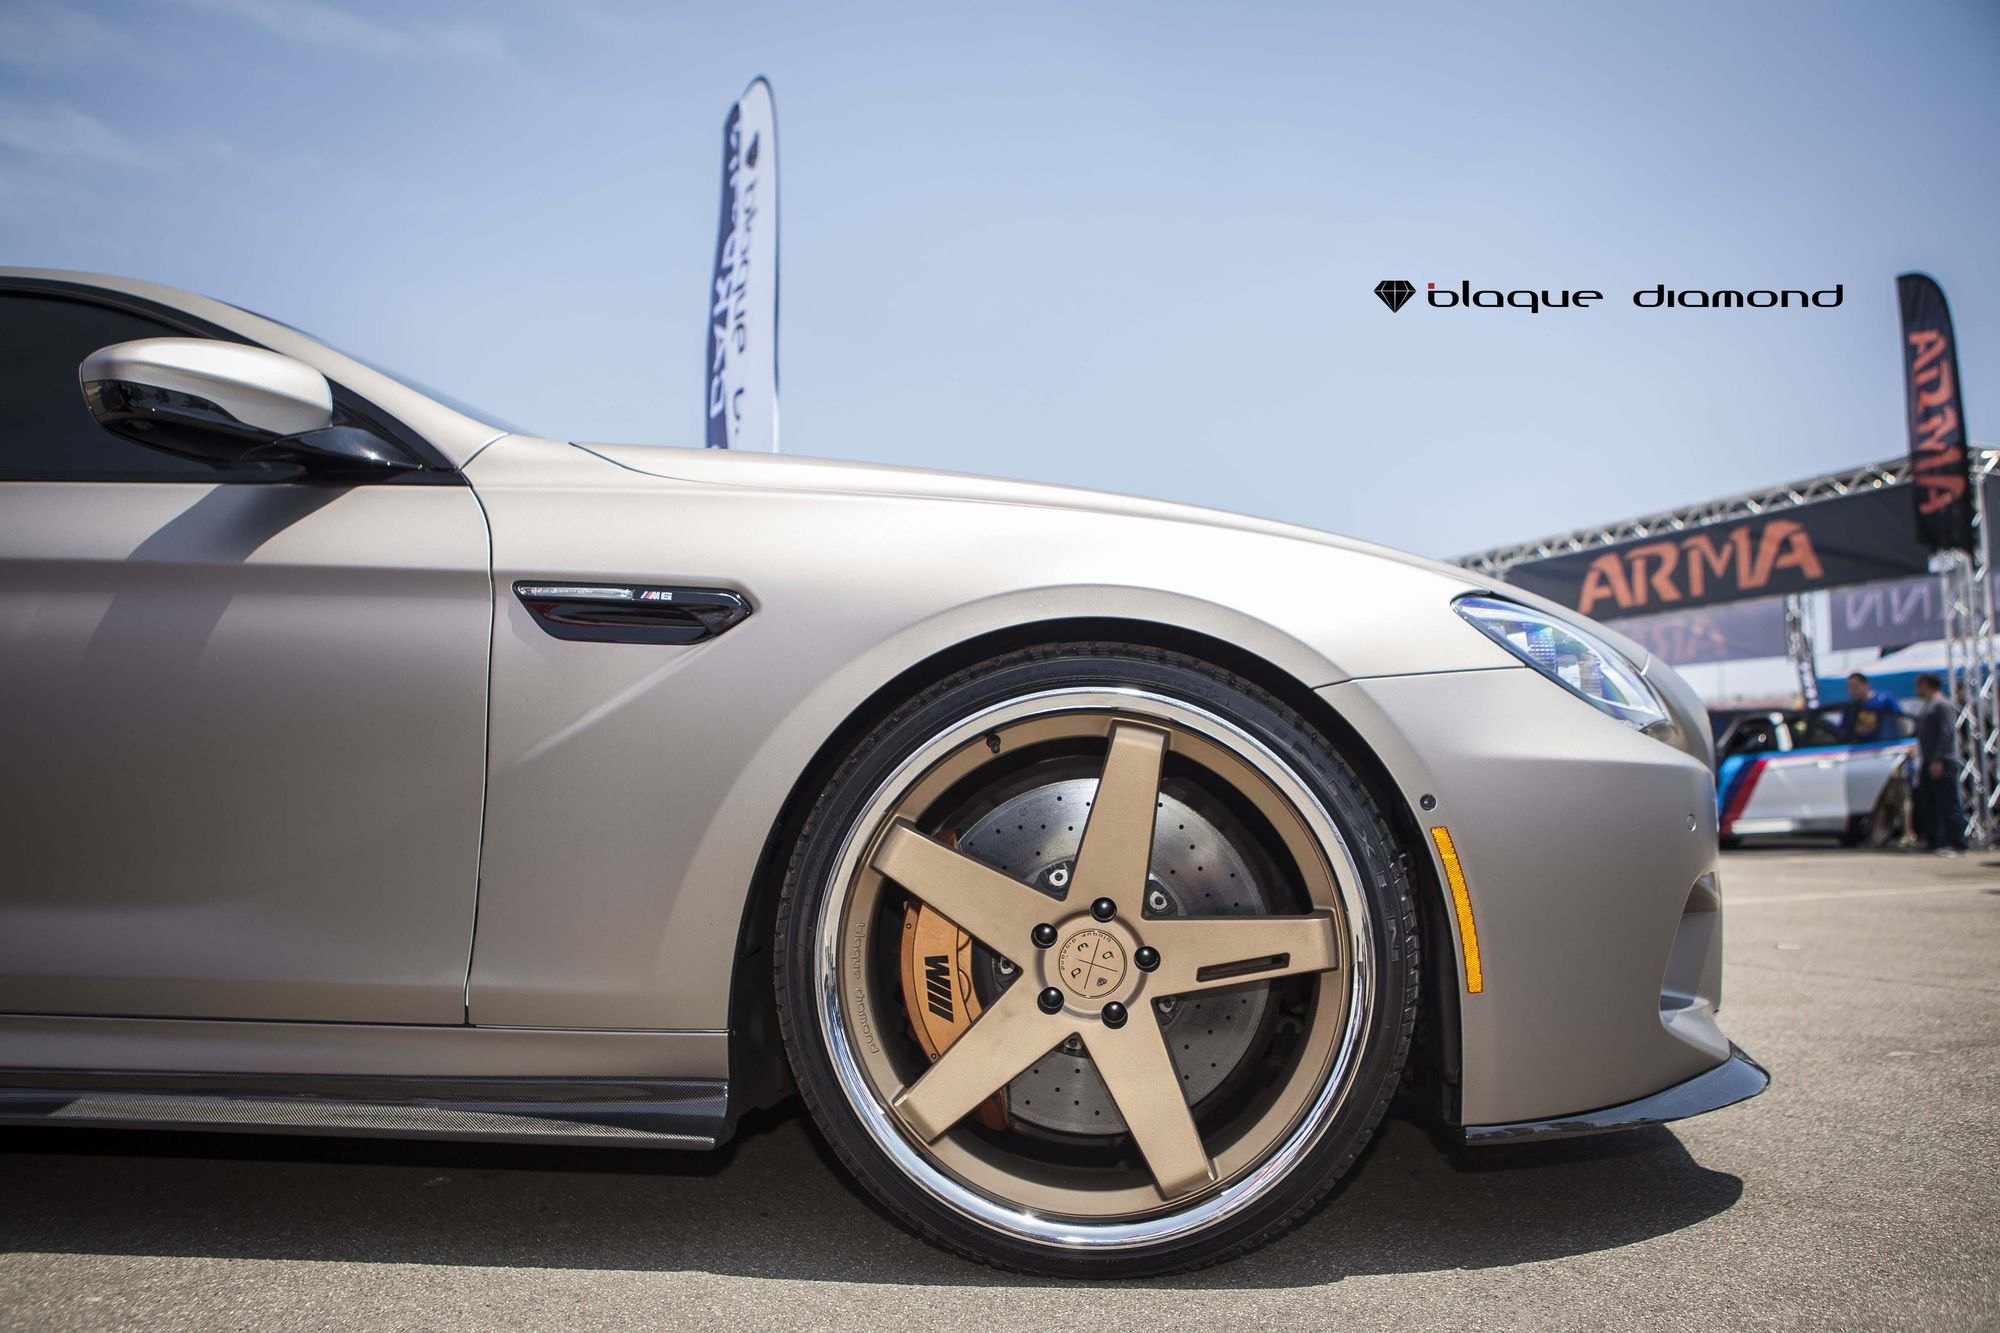 Carbon Fiber Side Skirts on Silver BMW 6-Series - Photo by Blaque Diamond